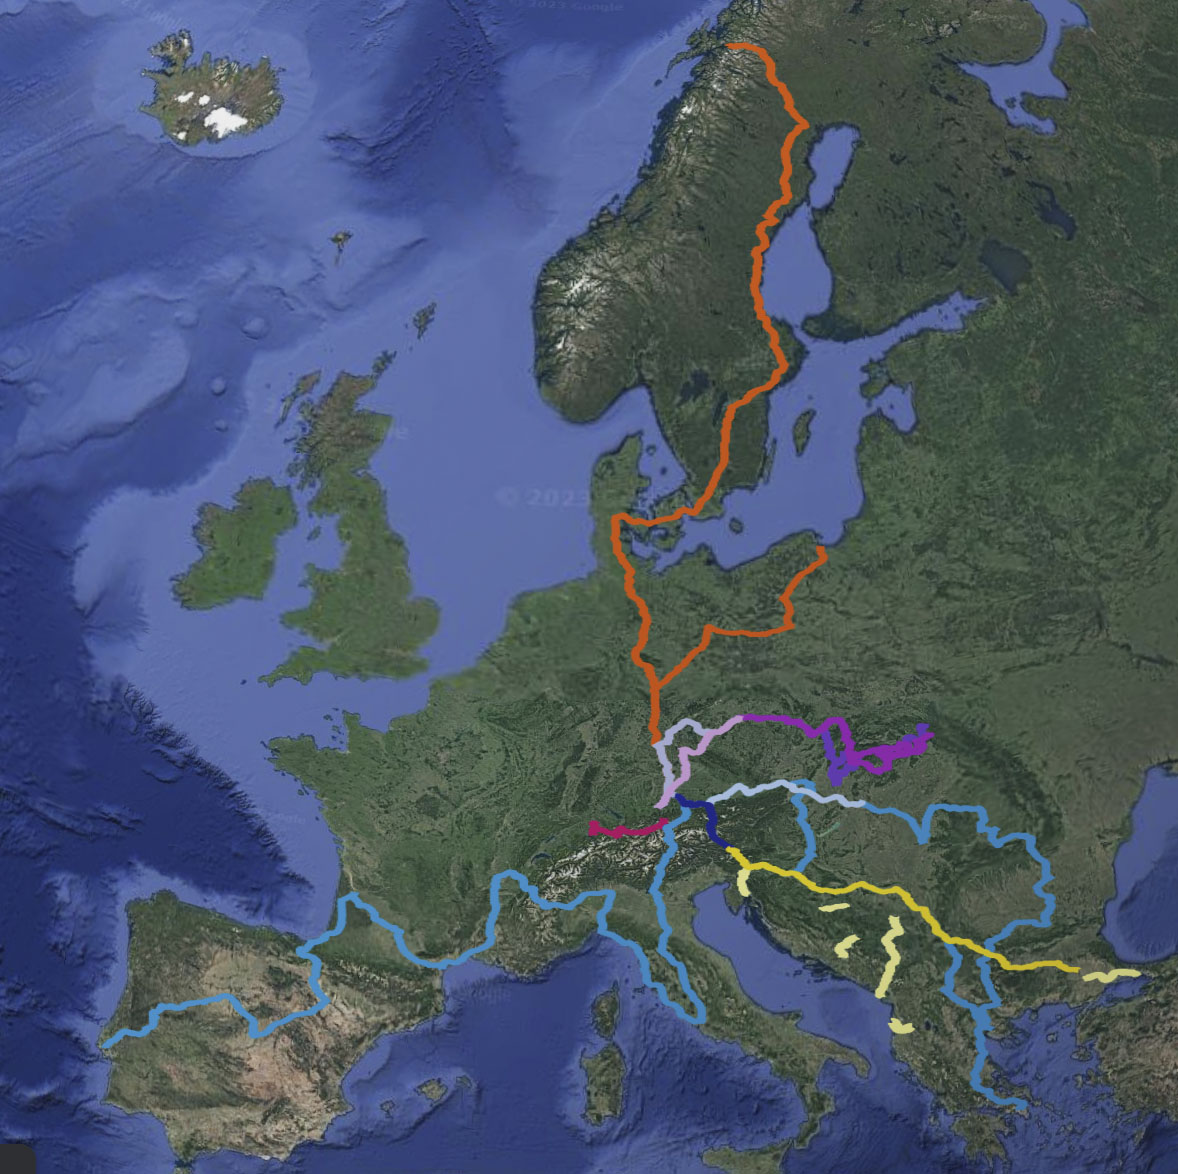 A satellite image of Europe with train routes marked, mainly in southern and eastern Europe as well as Scandinavia